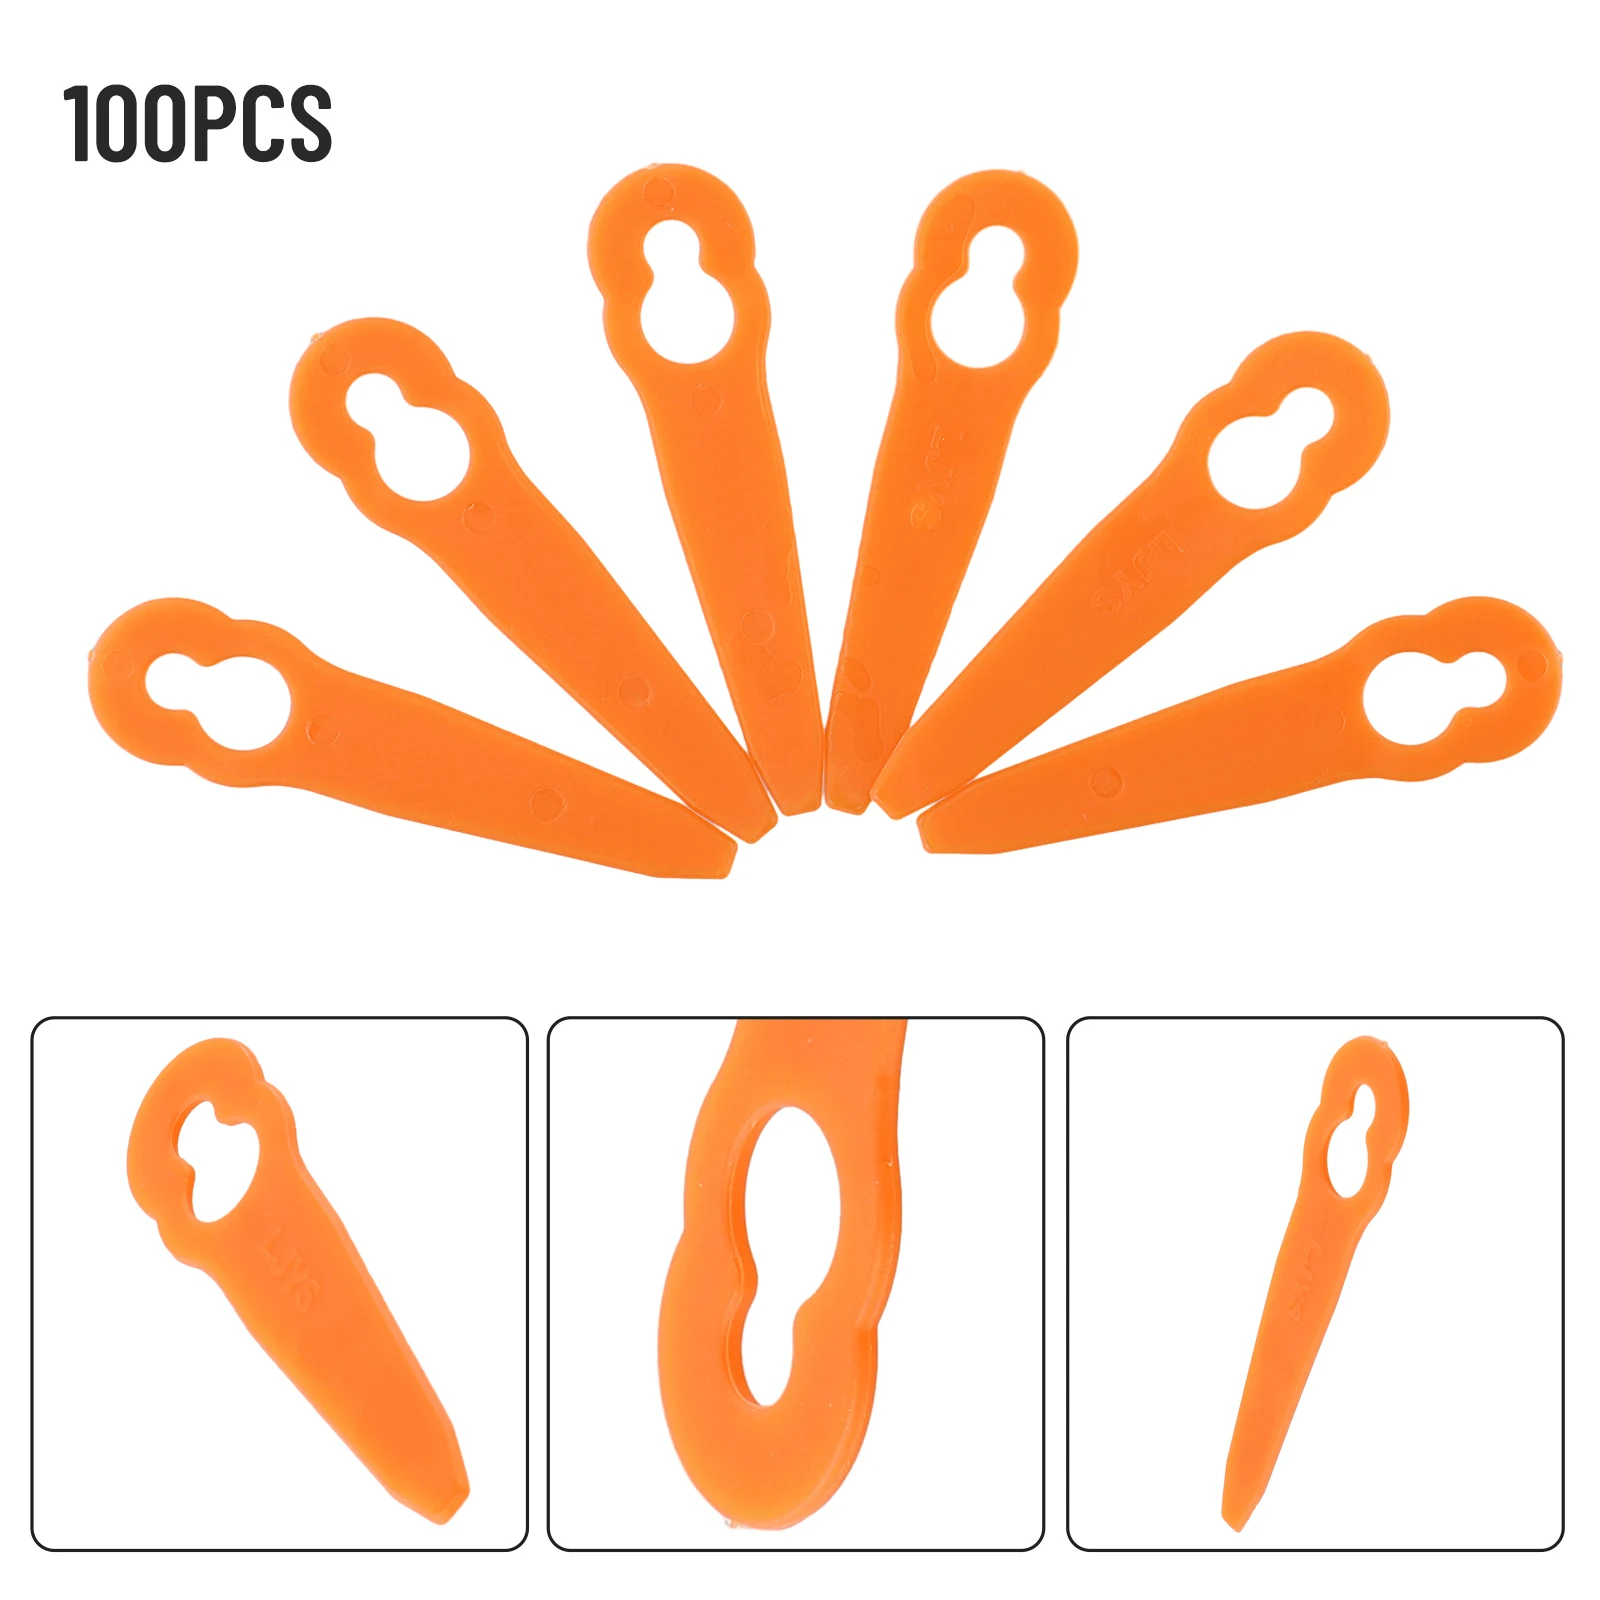 

100pcs Plastic Blades Cordless Strimmer Grass Trimmer Knives Lawn Mower Tool Part Garden Power Tool Accessories Parts